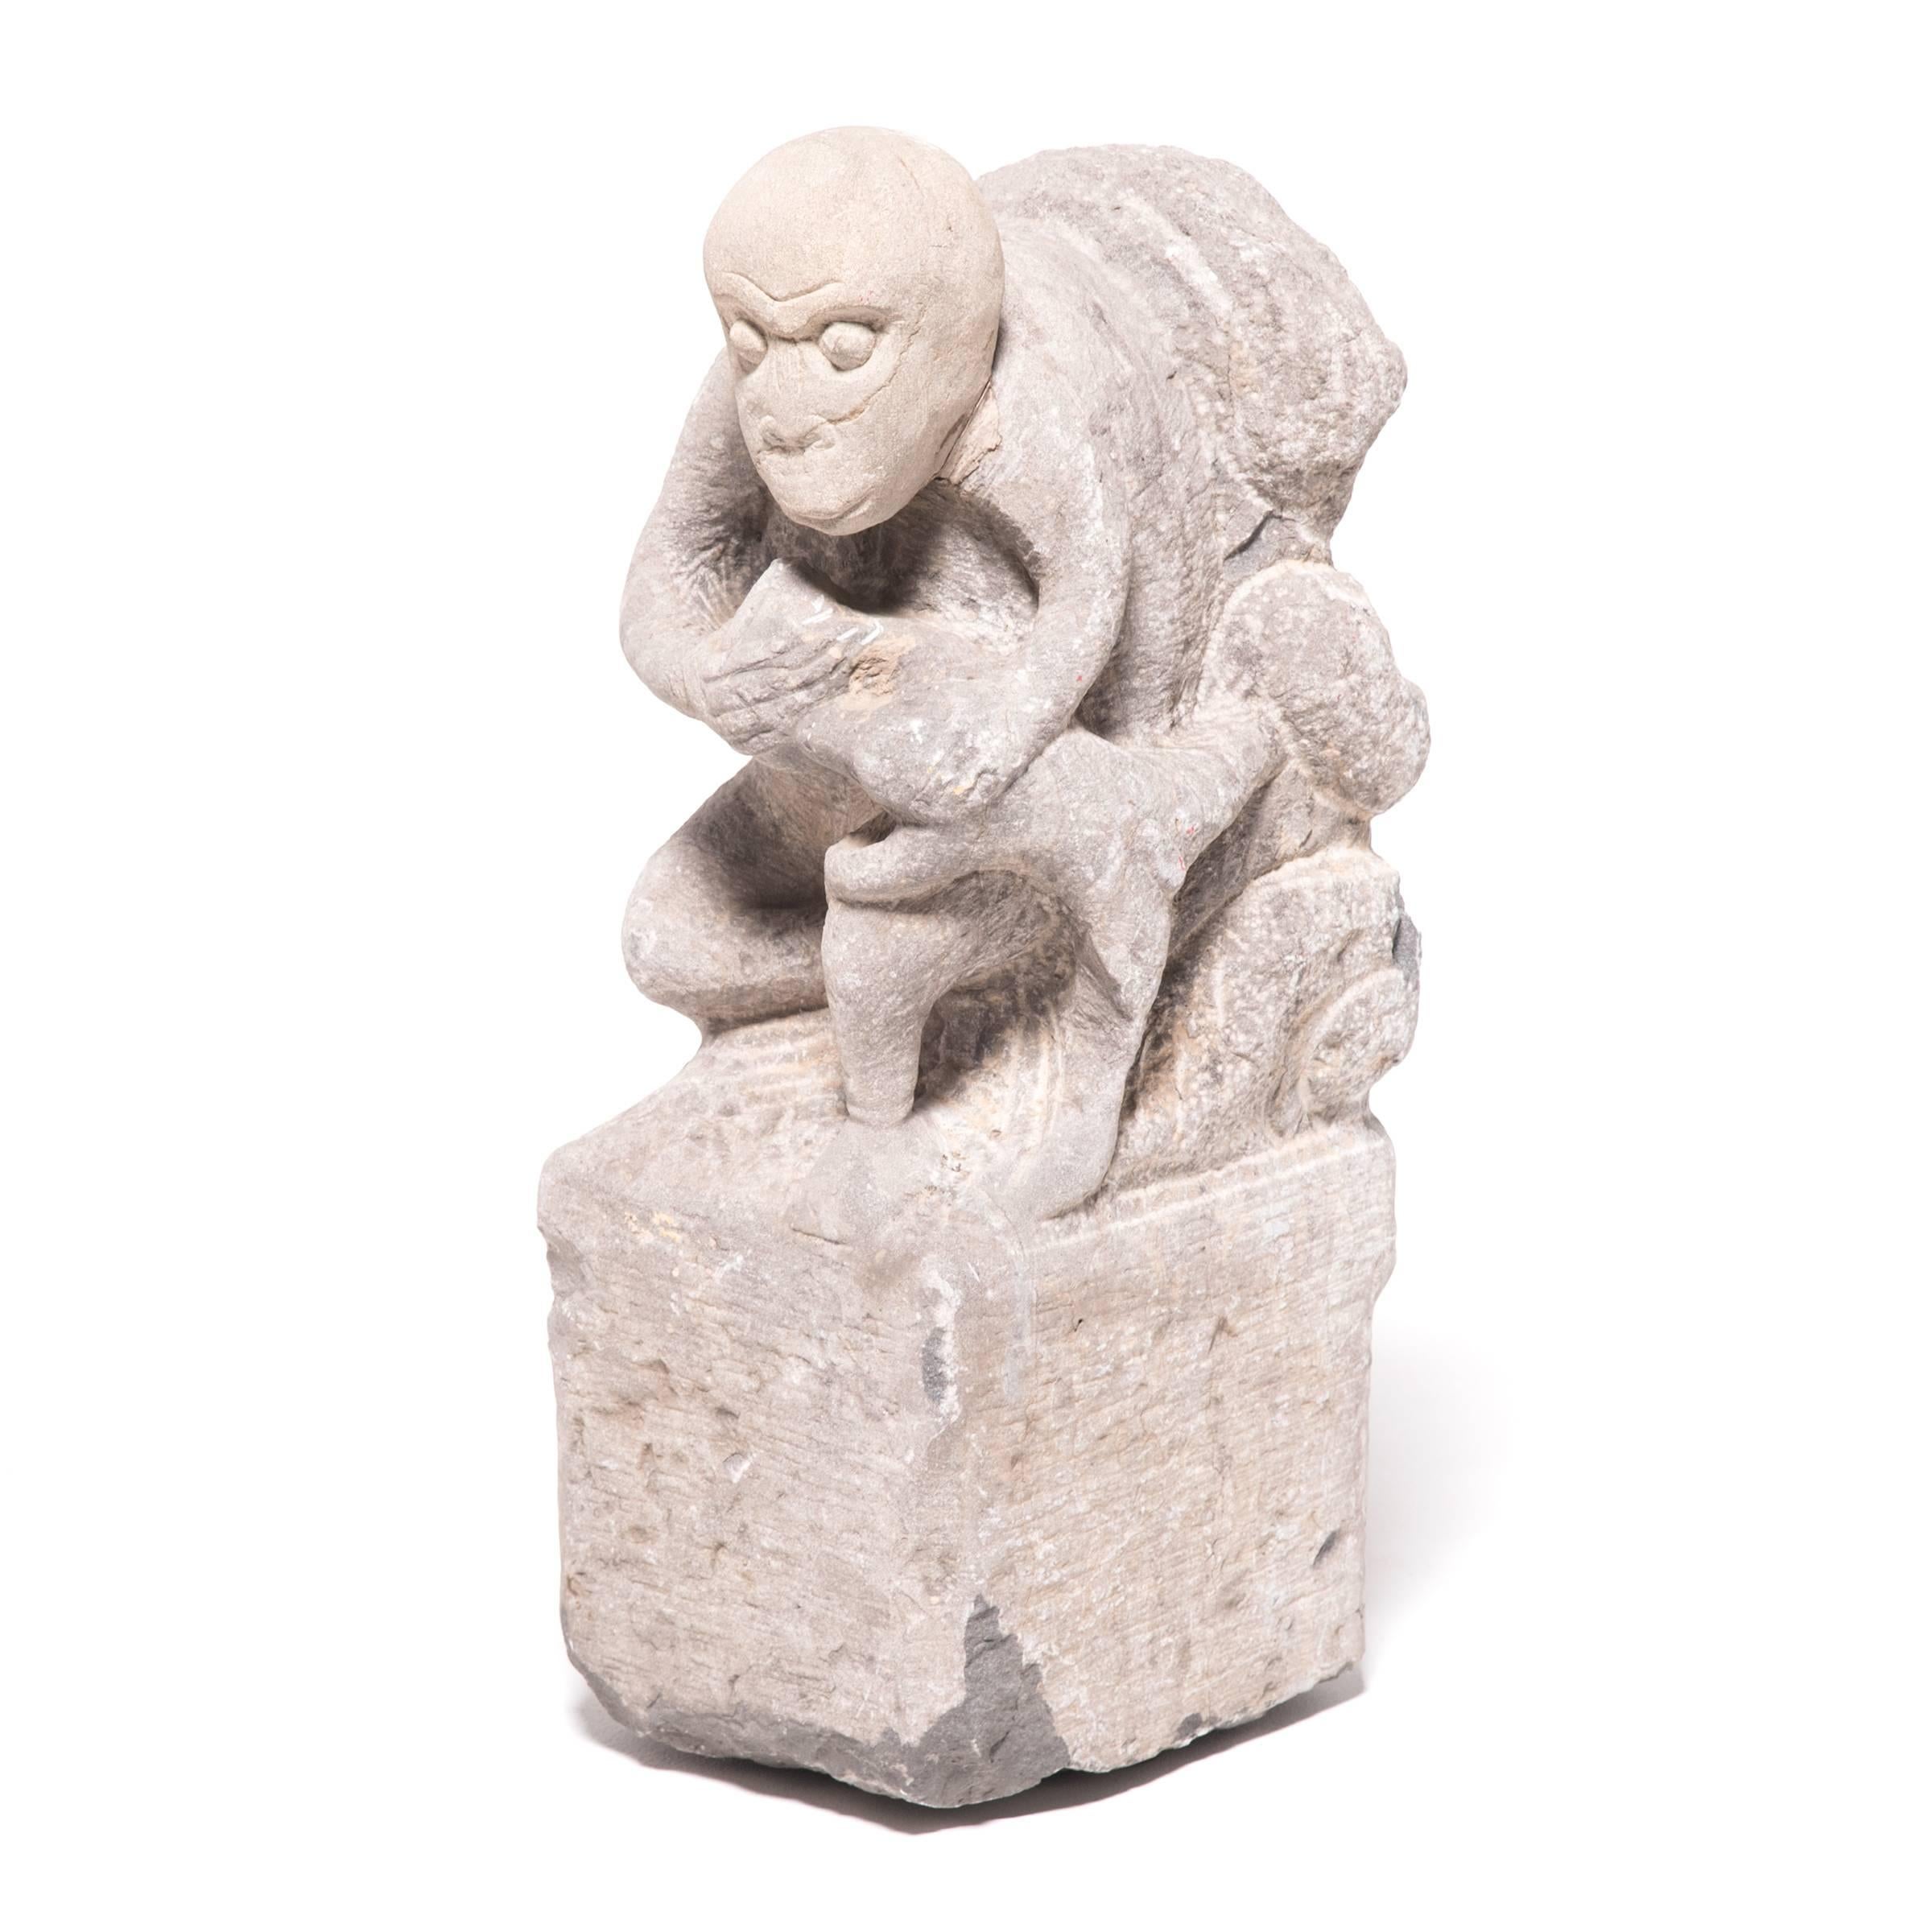 This expressive 19th century stone carving displays a kneeling monkey holding a peach. It symbolizes a wish for immortality in reference to the Ming-dynasty novel 